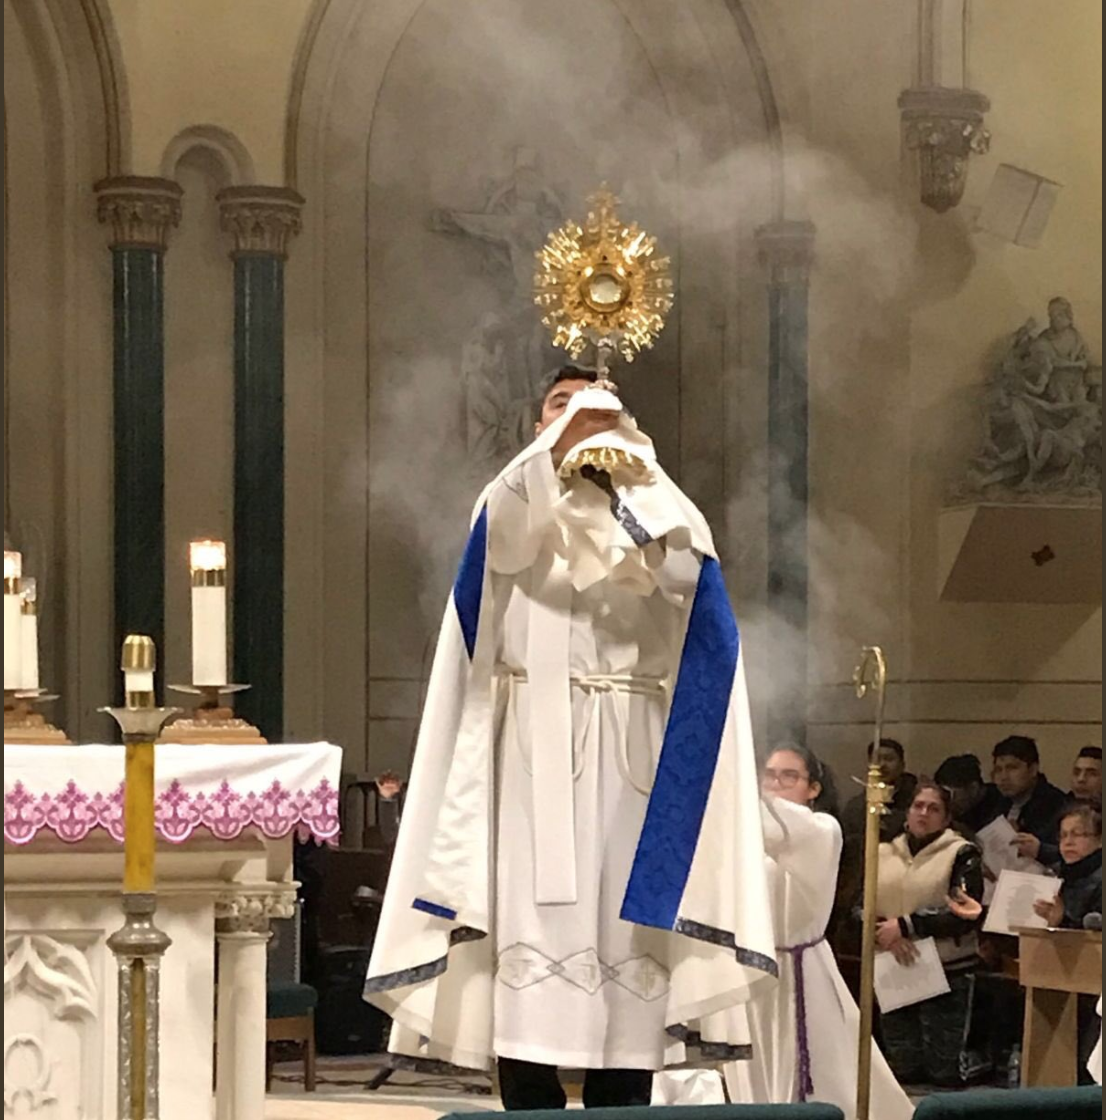 A priest is holding a crucifix in front of smoke.